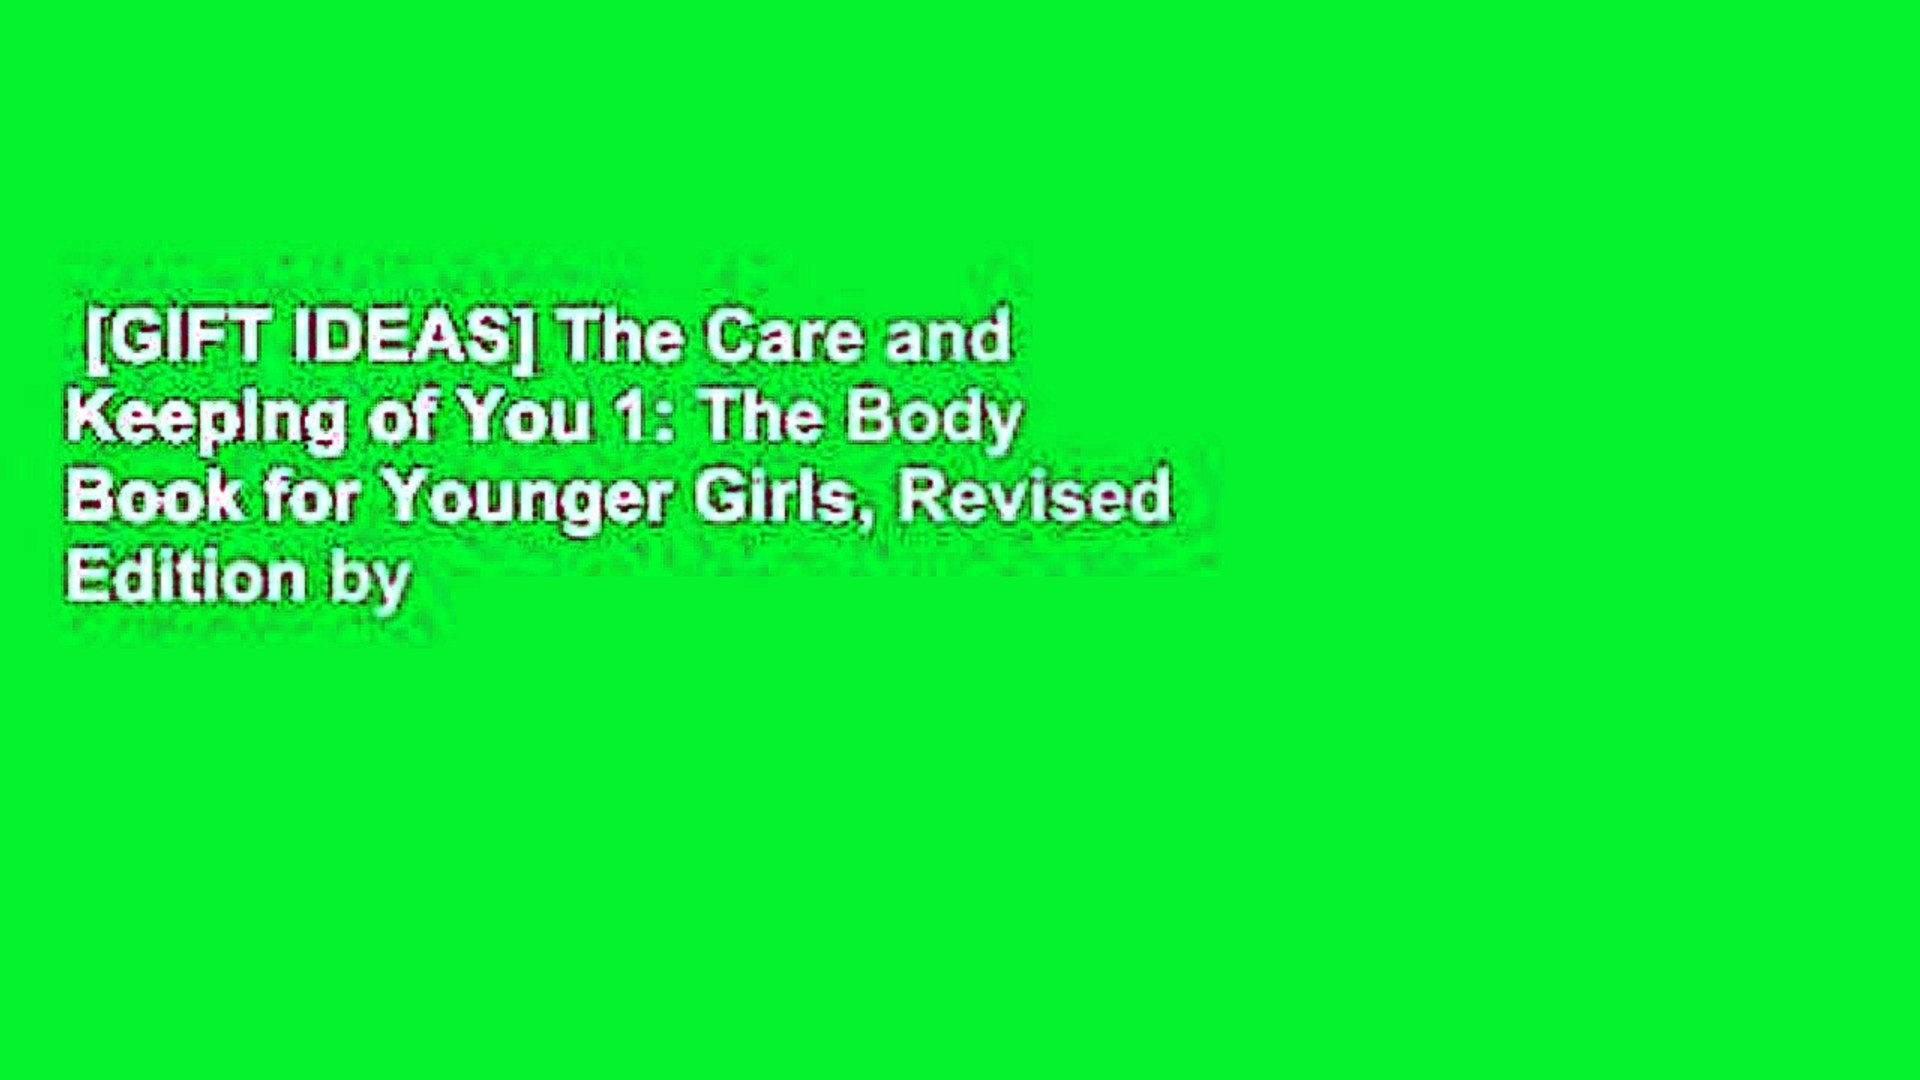 The Care and Keeping of You The Body Book for Younger Girls Revised